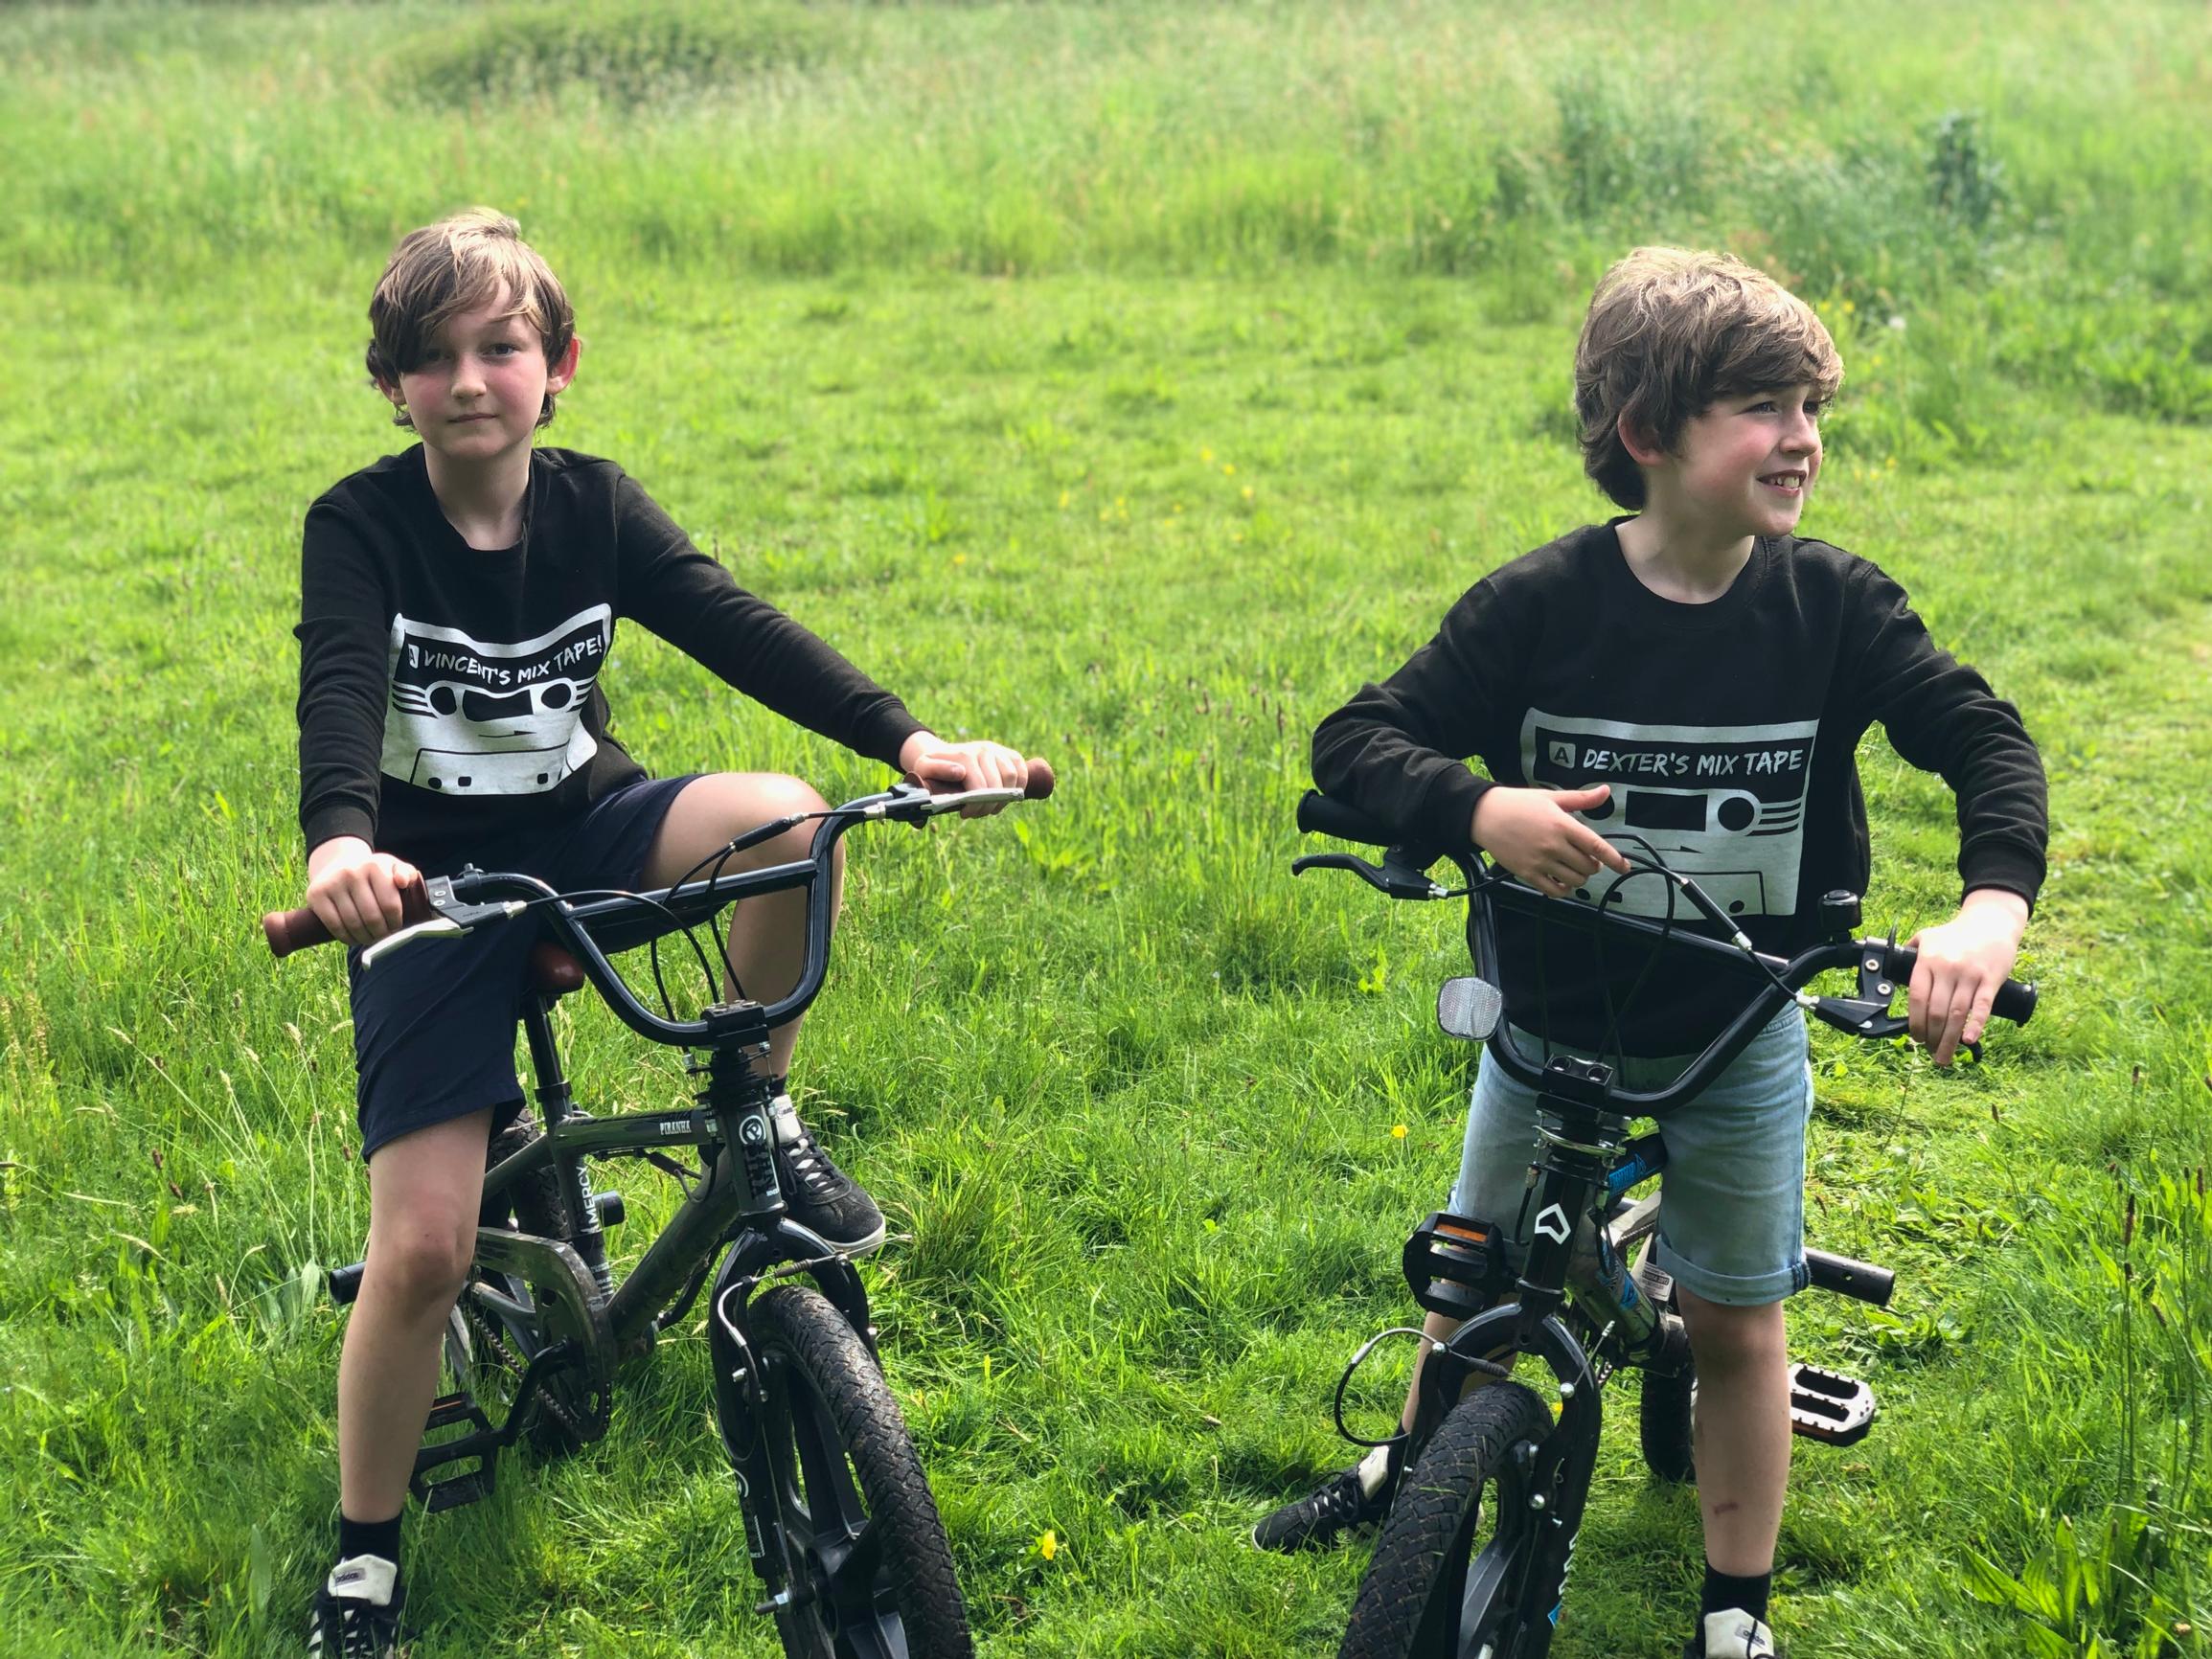 Learning to cycle is a brilliant way to help children live happy, healthy and independent lives